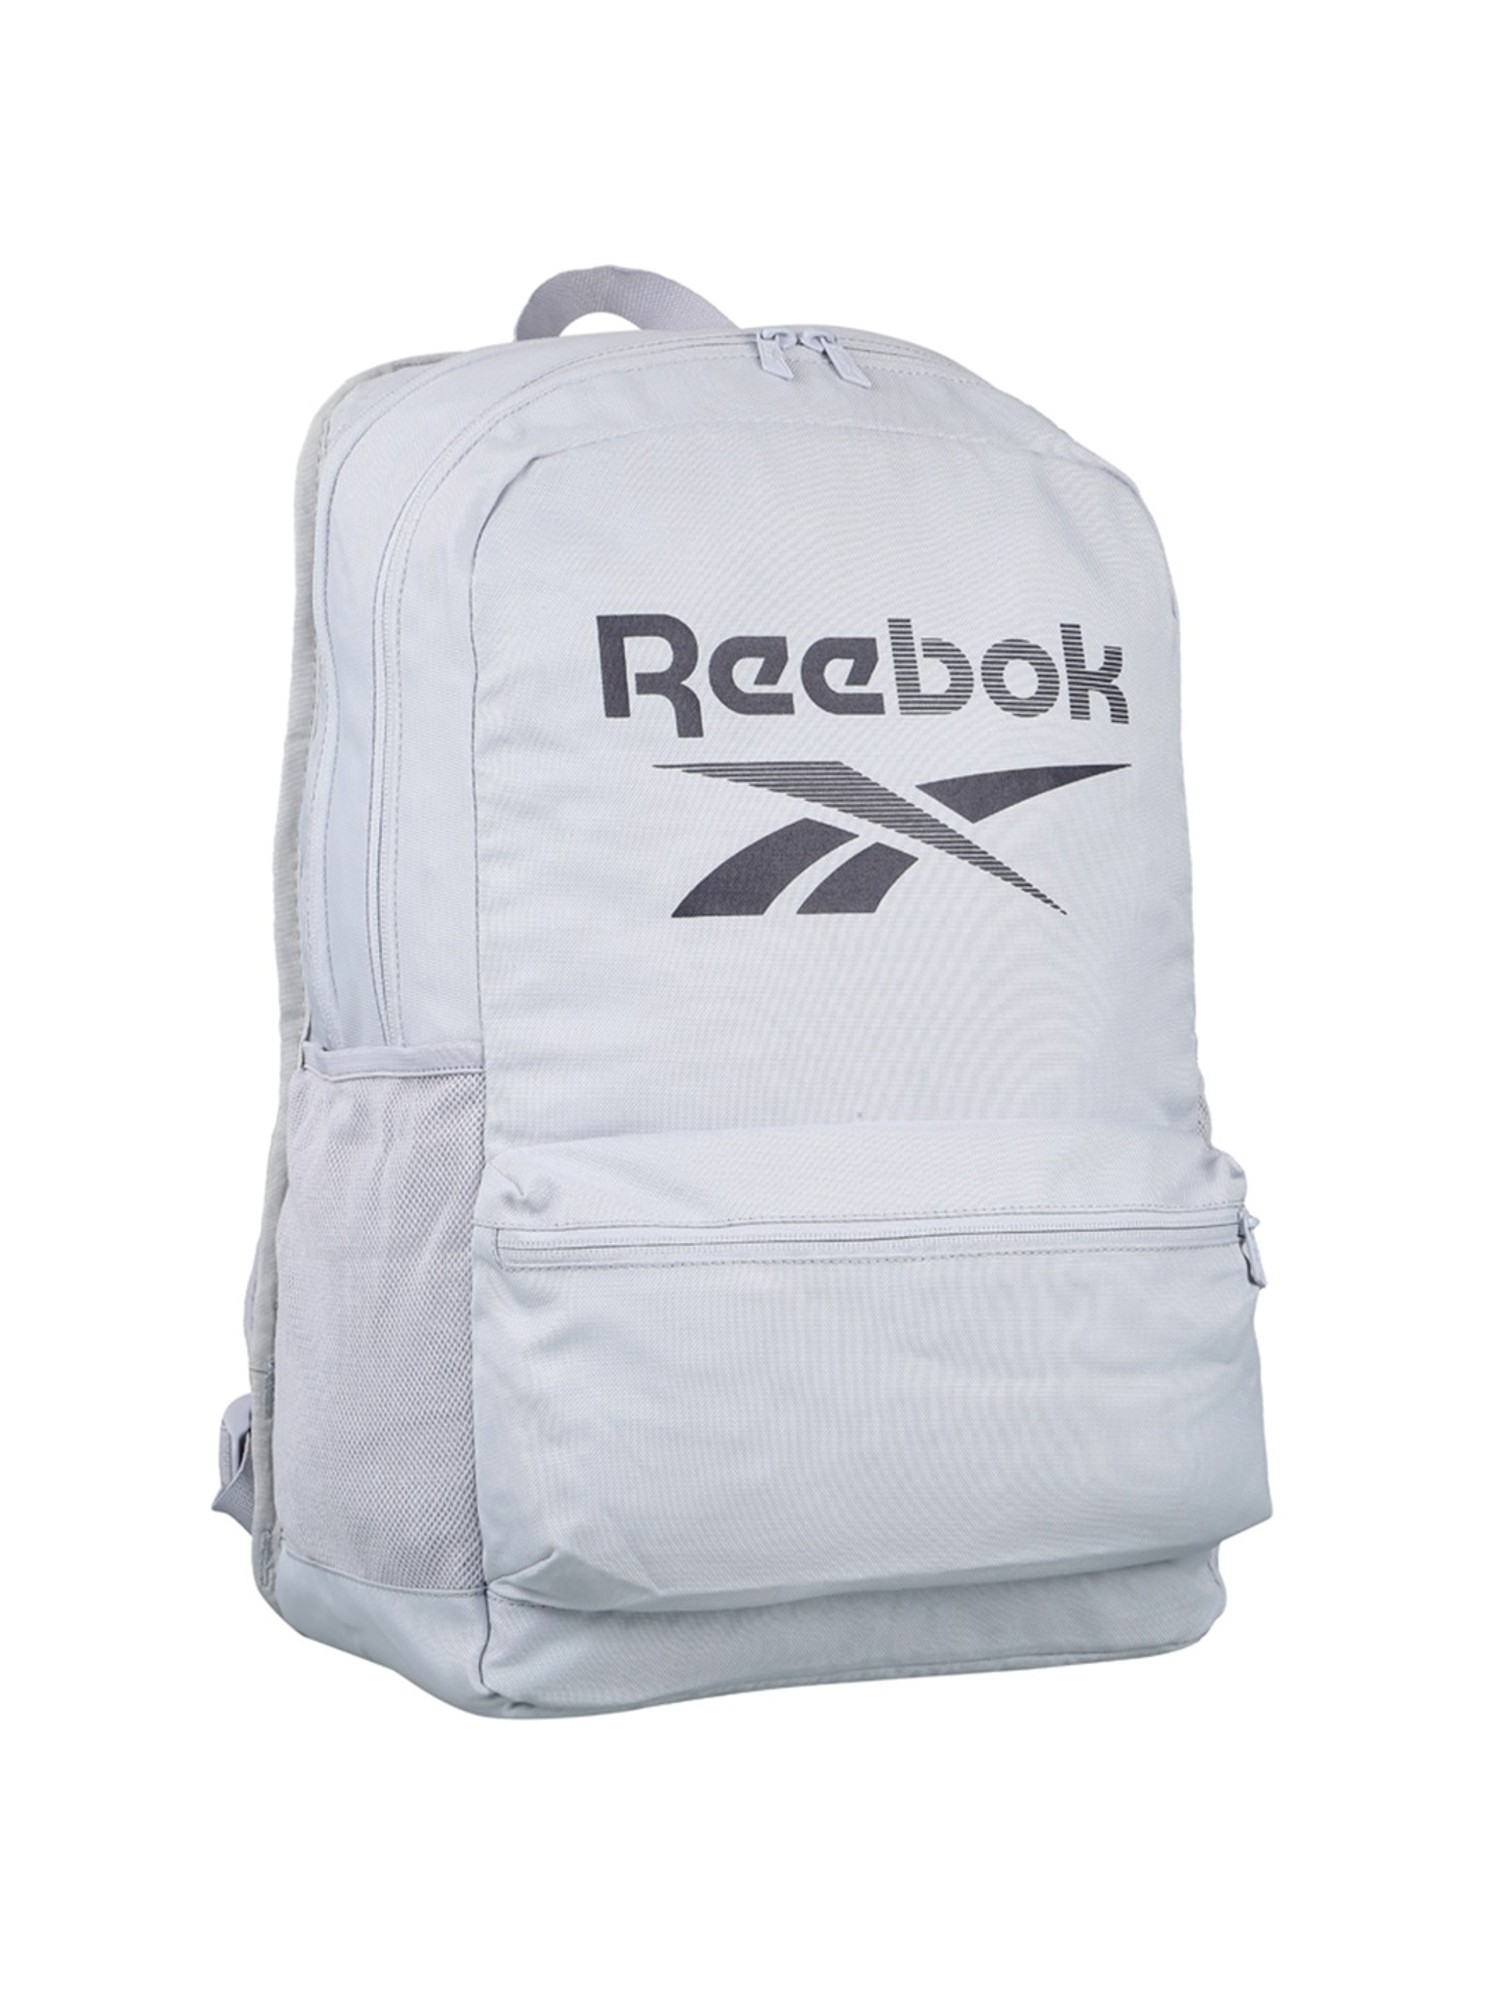 Buy Reebok White Solid Backpack Online At Best Price @ Tata CLiQ